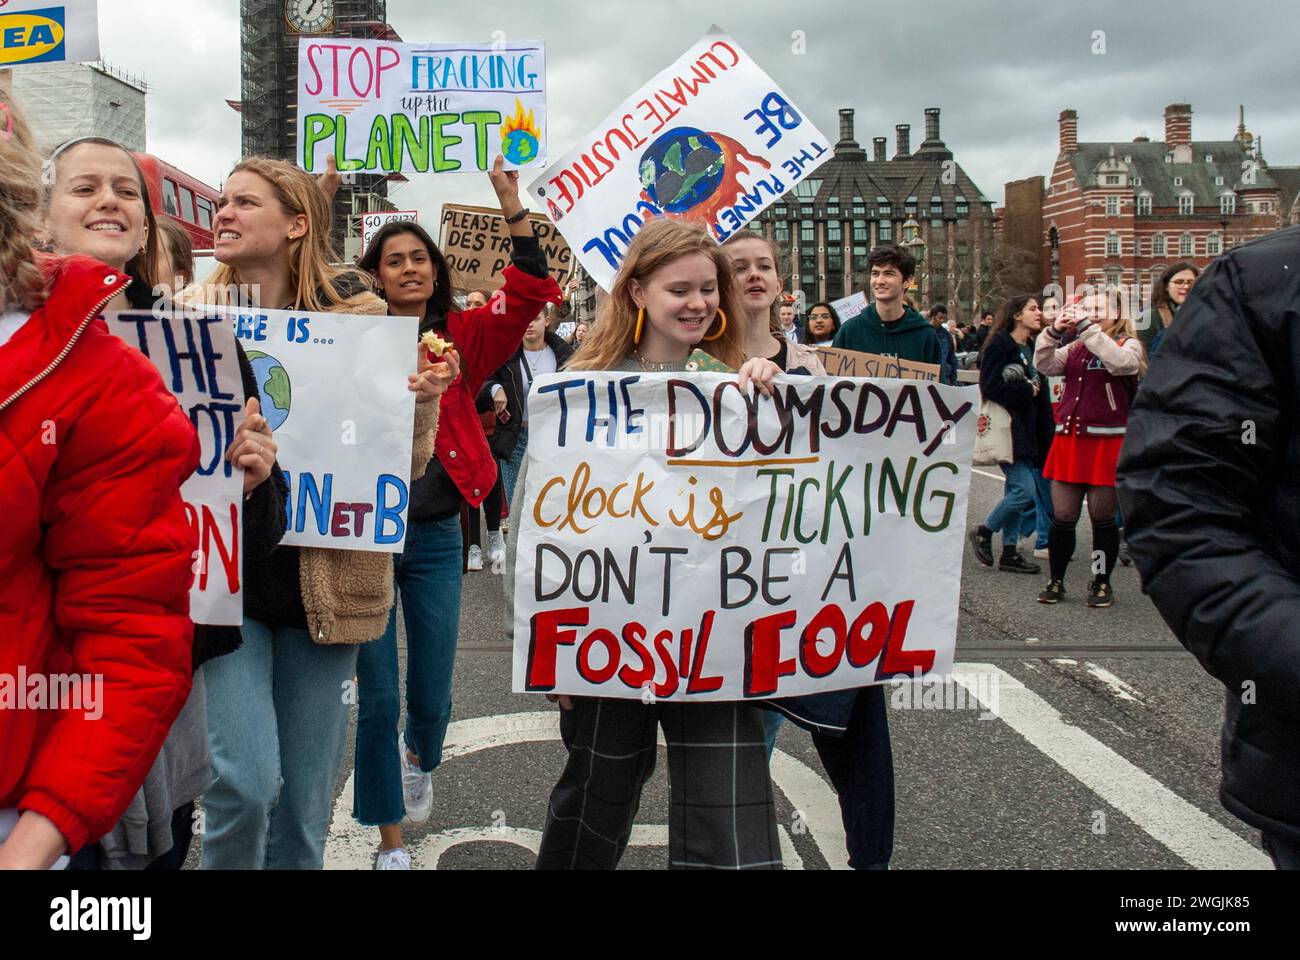 London. Climate Protest. Girls with placards 'Stop fracking the planet' 'Climate Justice' and 'The Doomsday clock is ticking, don't be a fossil fool'. Stock Photo